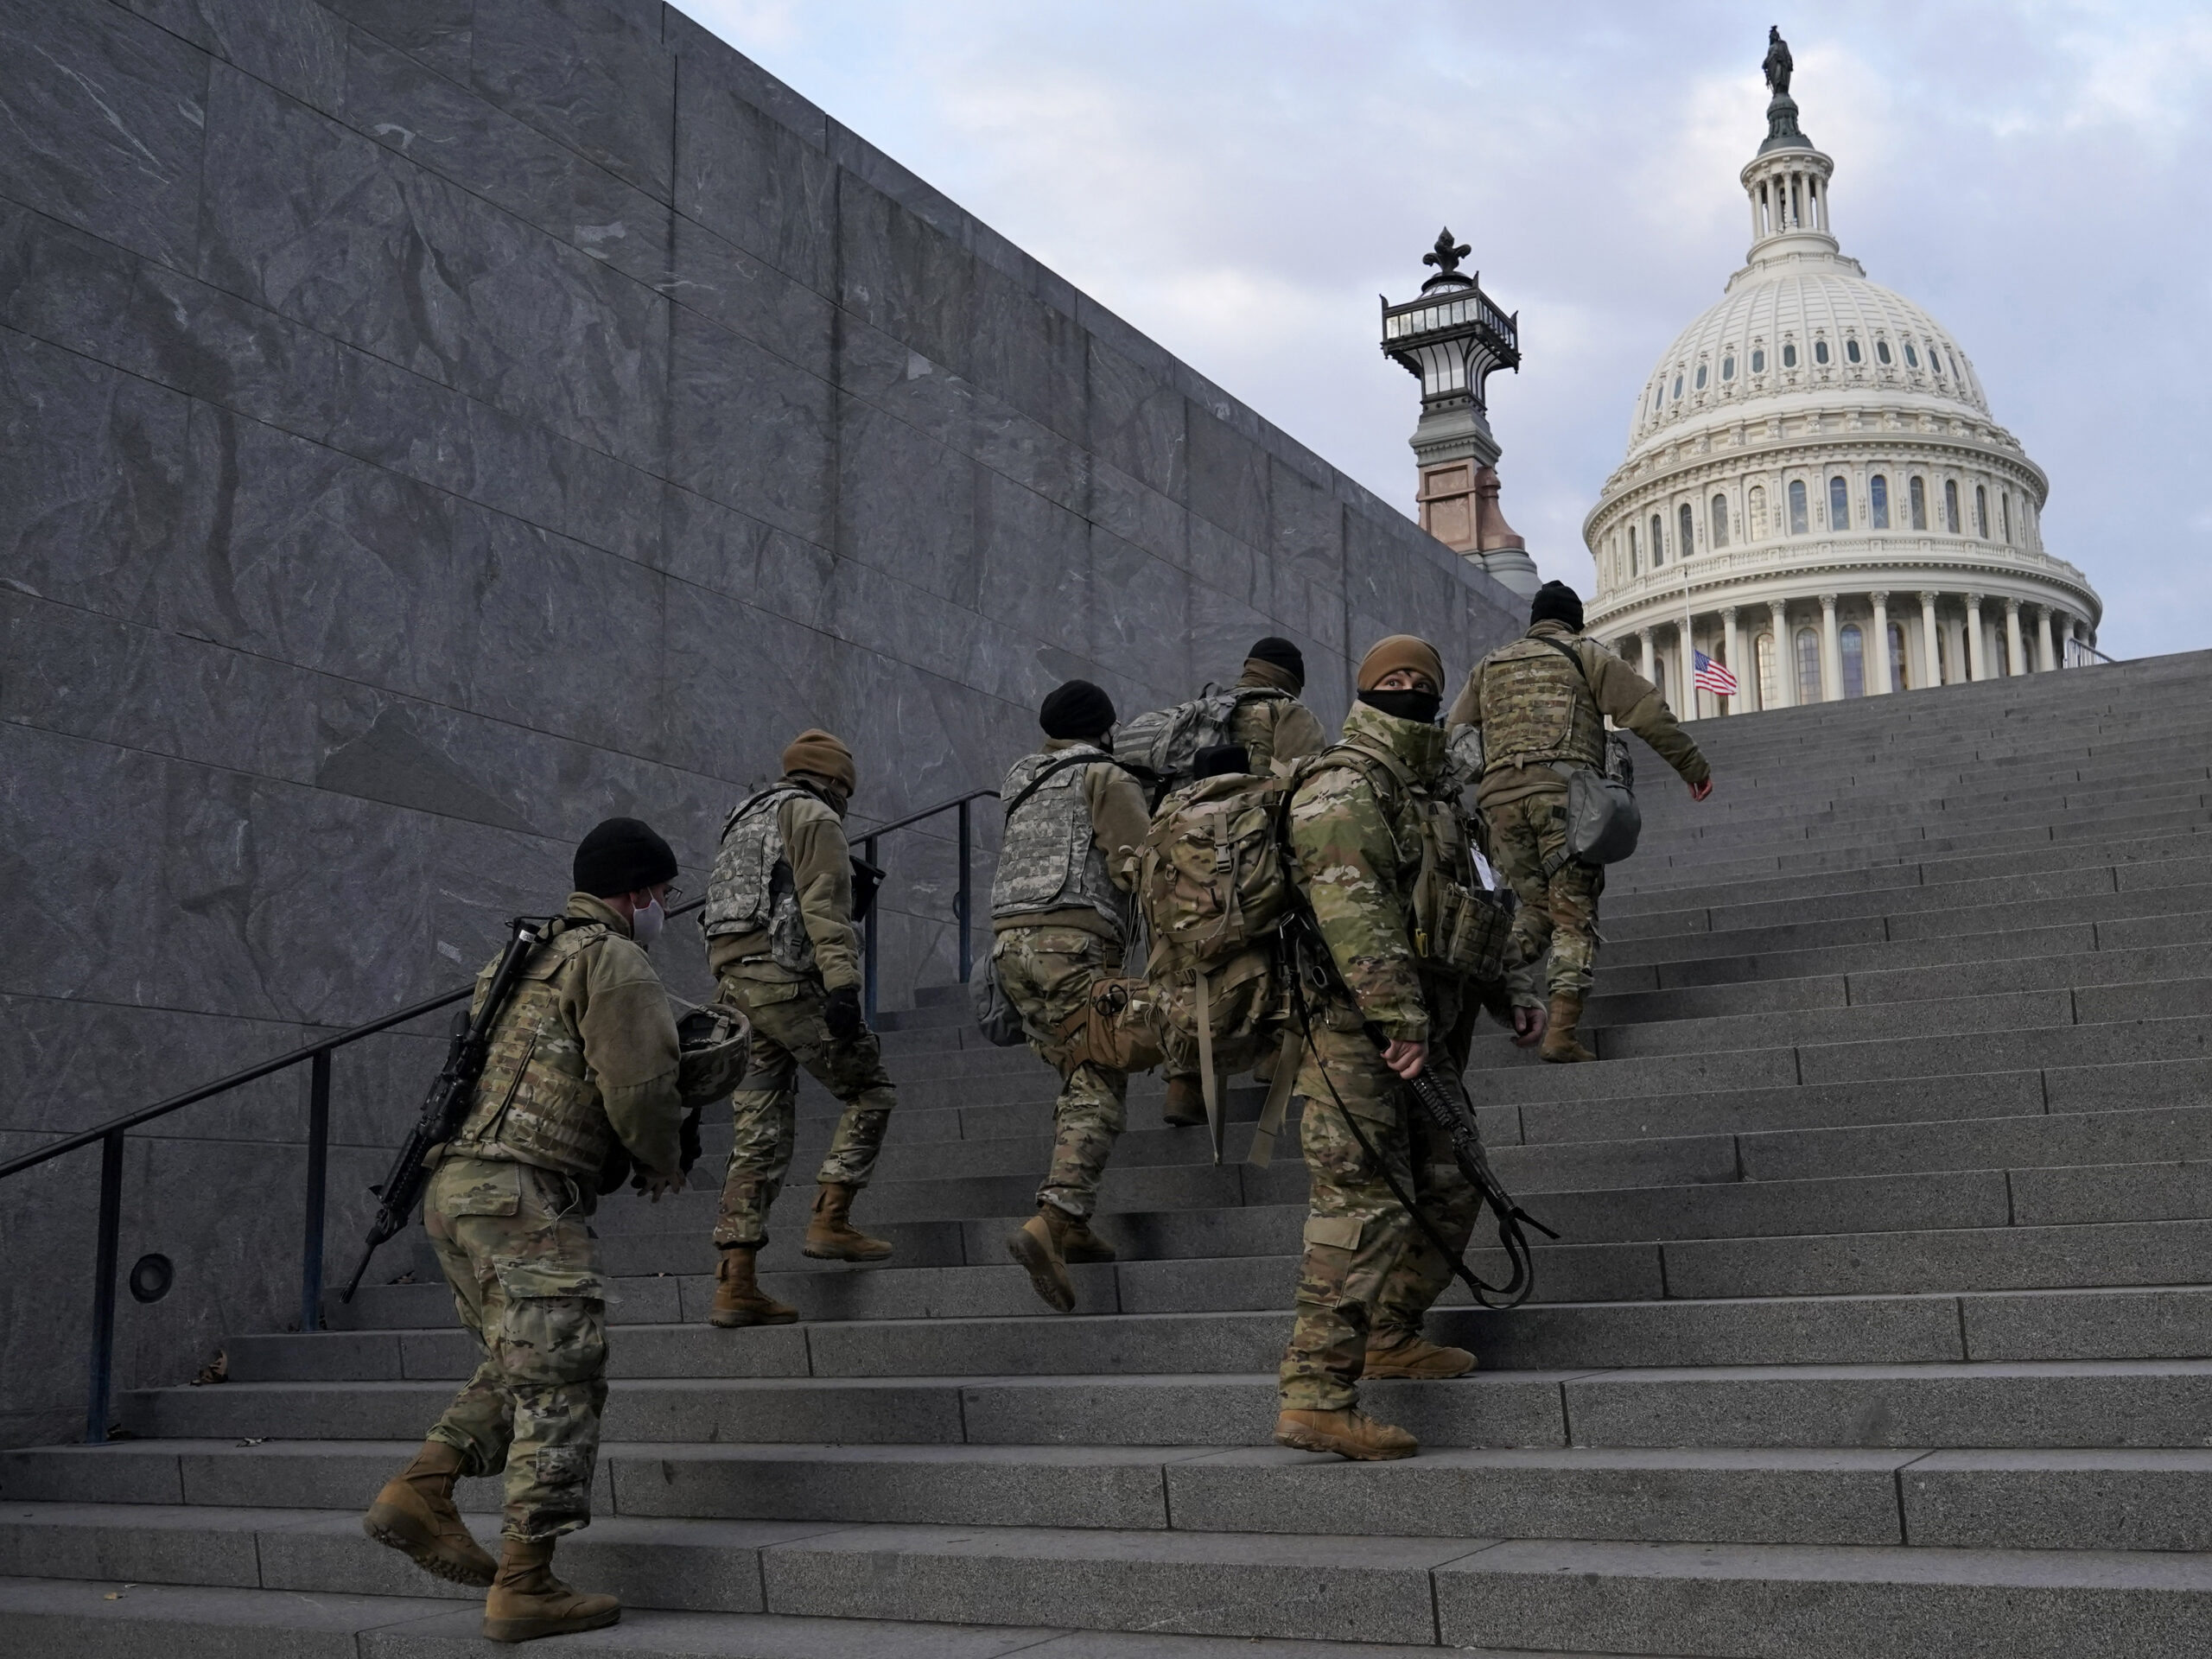 National Guard members take a staircase toward the U.S. Capitol building before a rehearsal for President-elect Joe Biden's Inauguration in Washington on Jan. 18, 2021. Experts in constitutional law and the military say the Insurrection Act gives presidents tremendous power with few restraints.